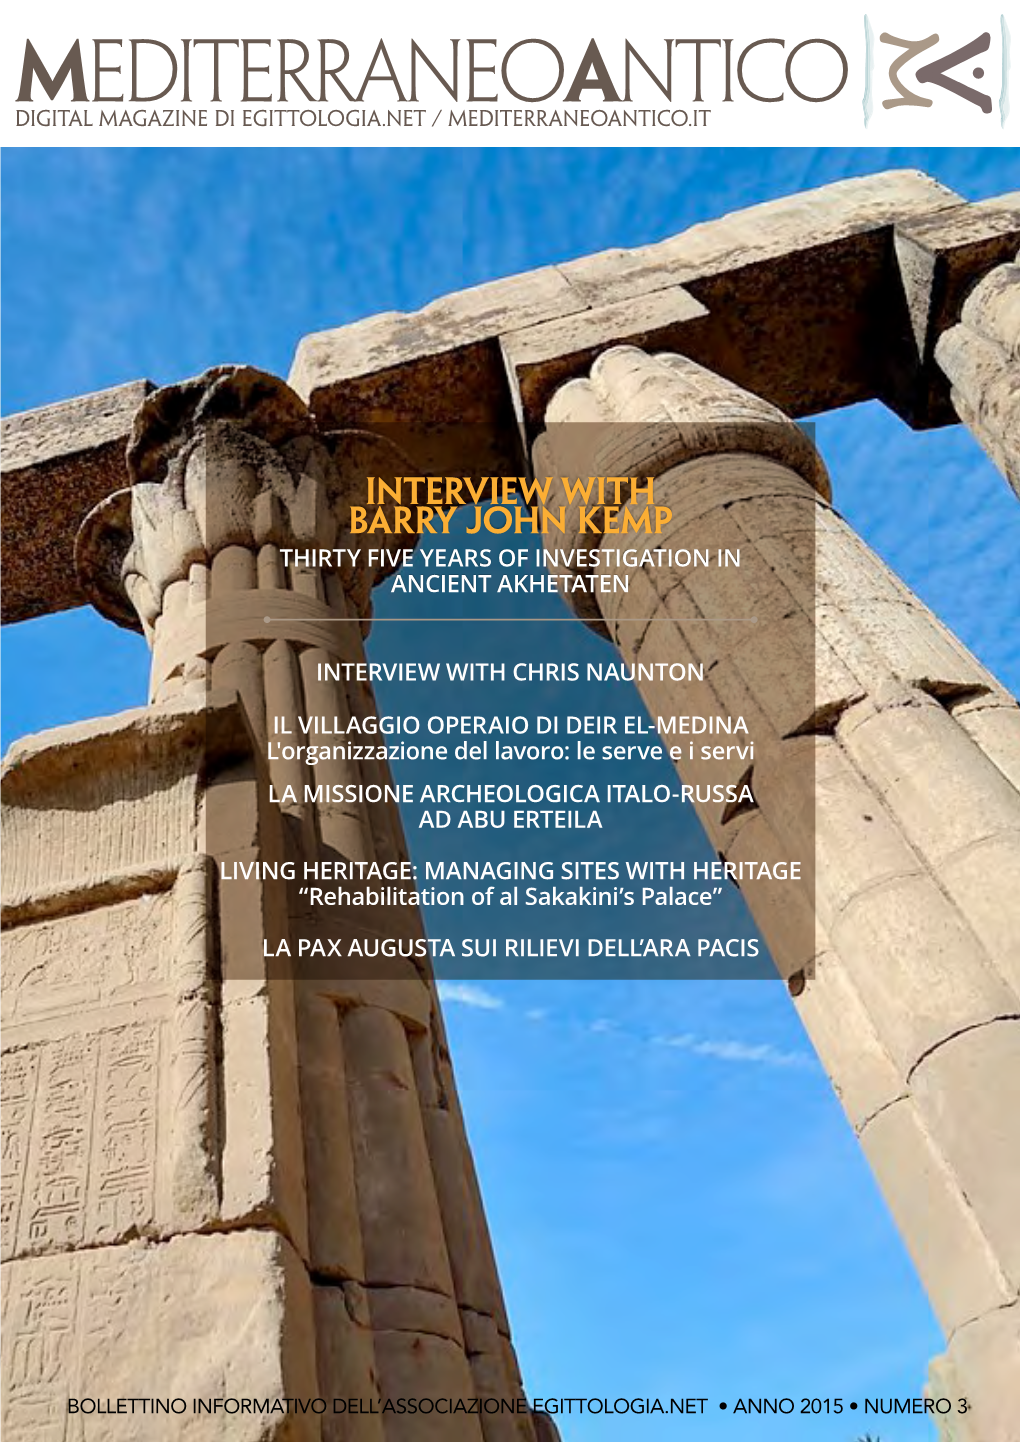 Interview with Barry John Kemp THIRTY FIVE YEARS of INVESTIGATION in ANCIENT AKHETATEN